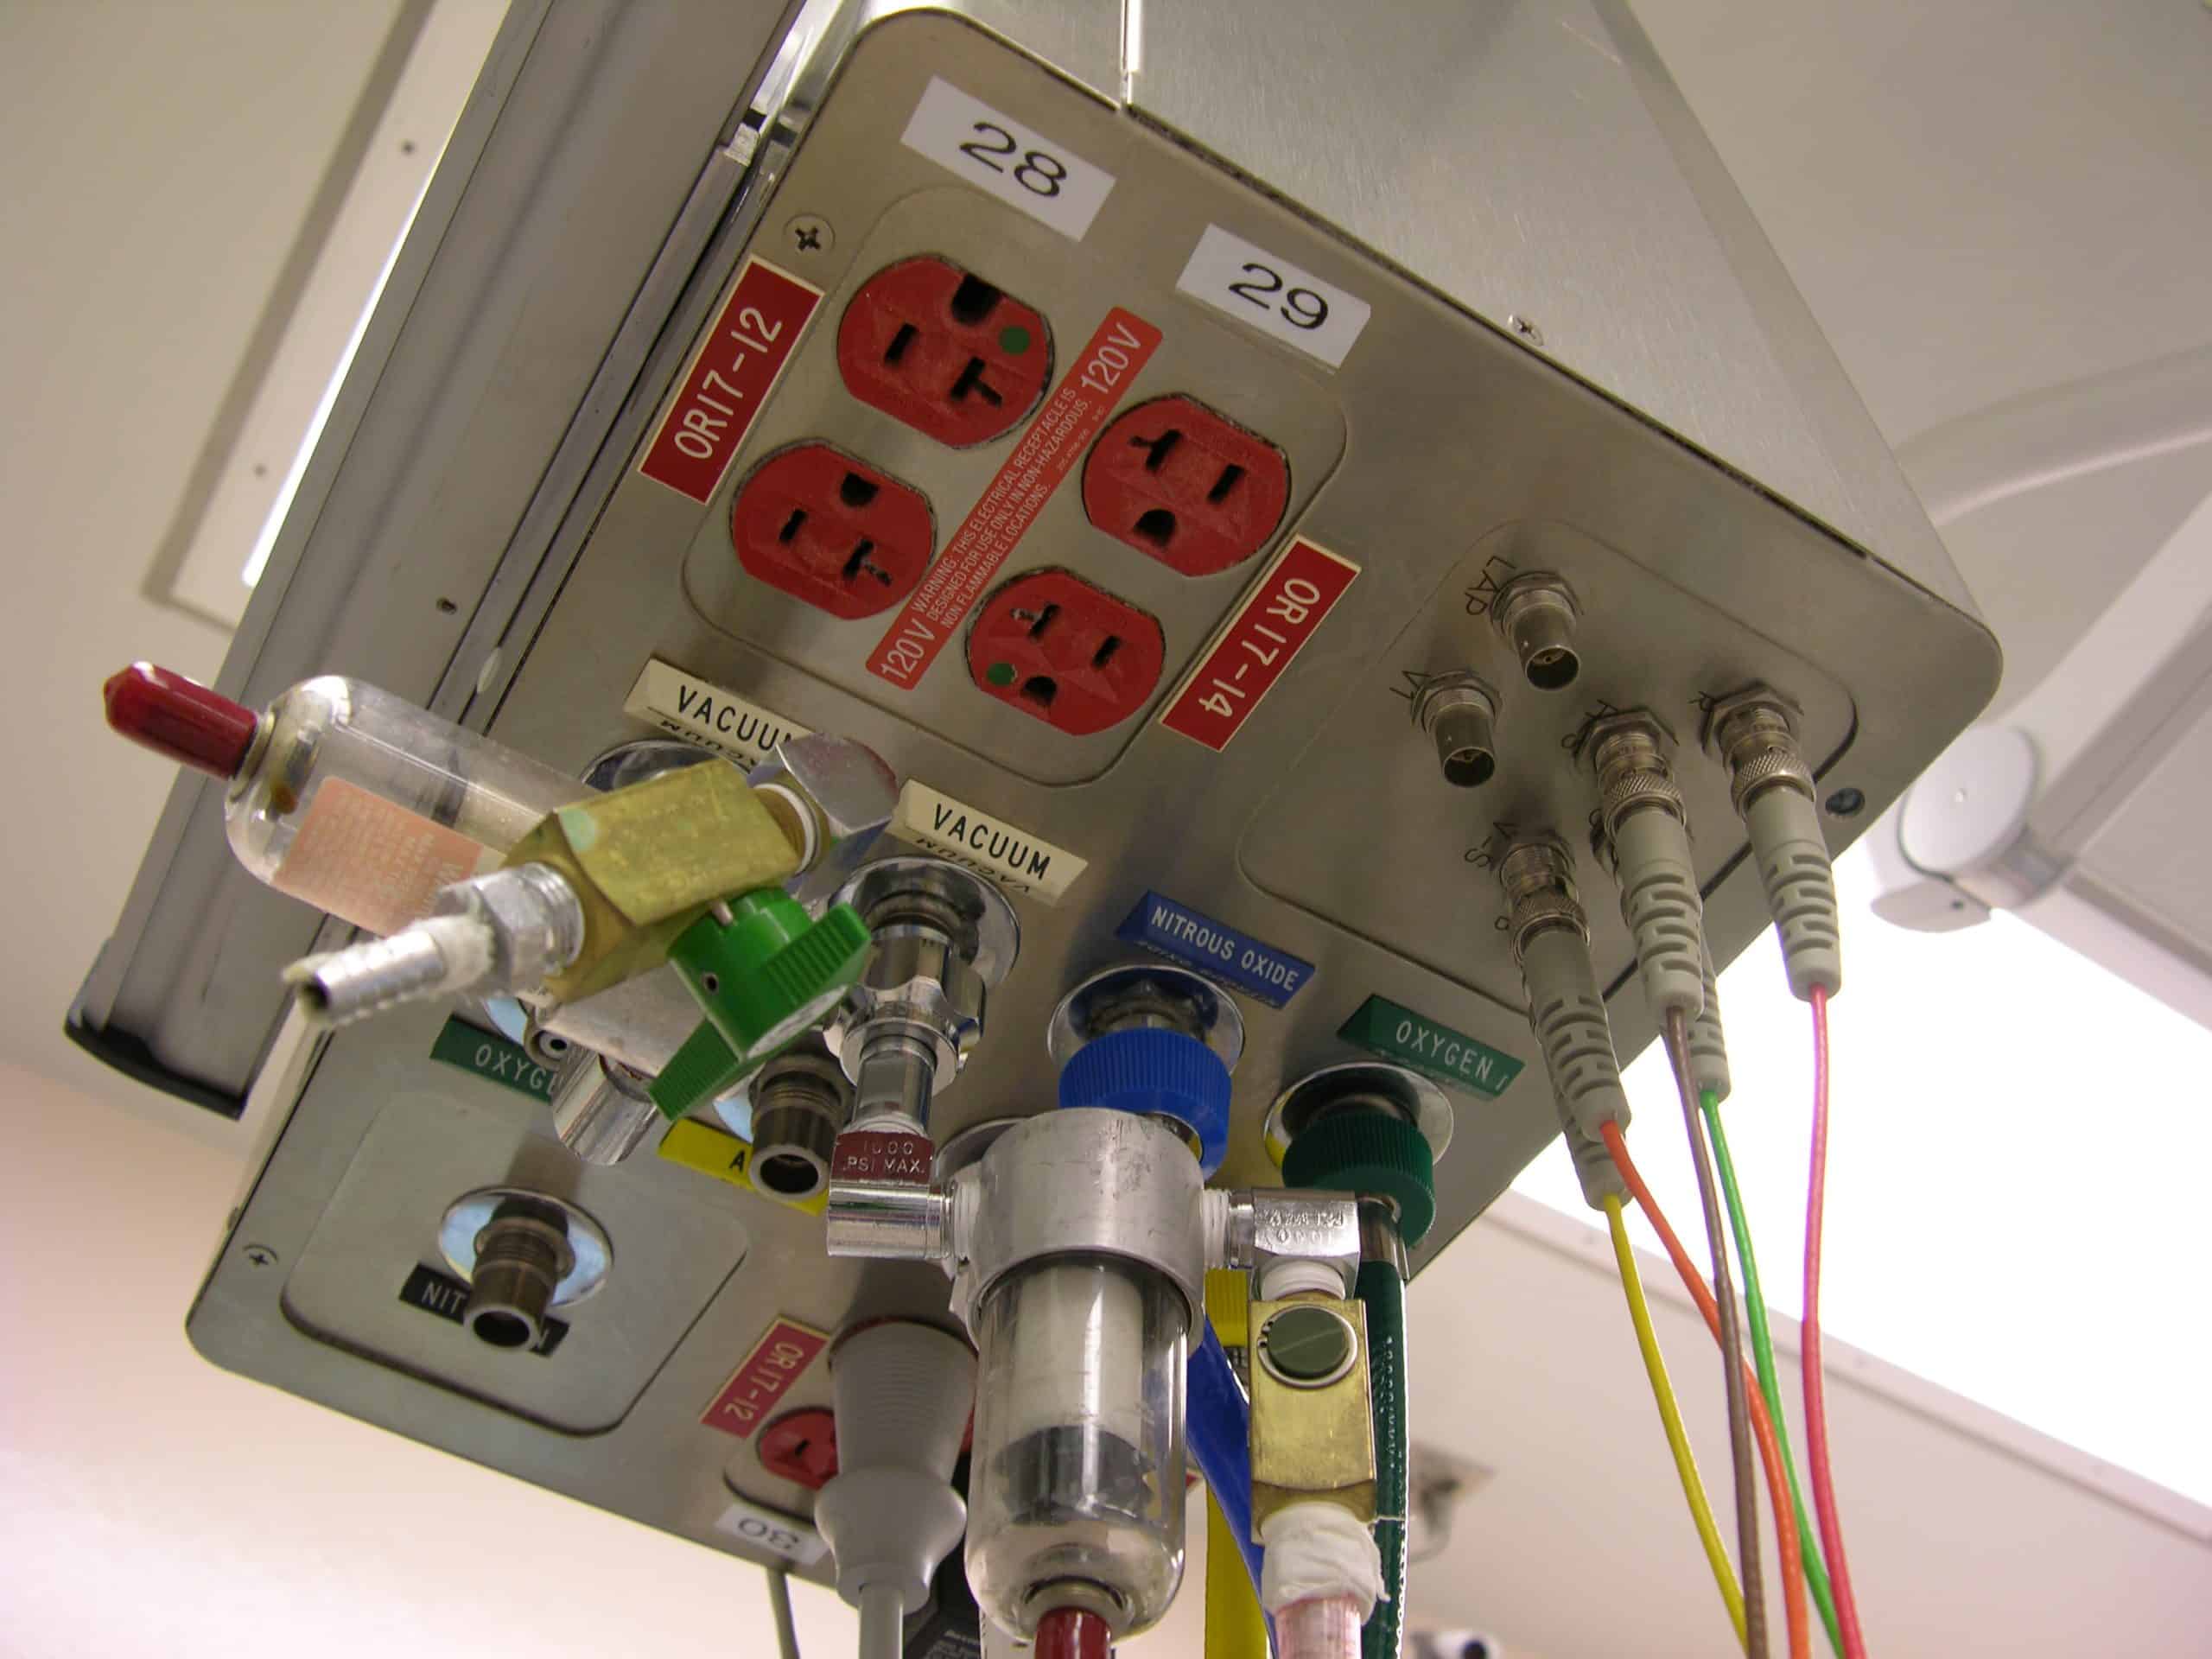 How Operating Room Designs Avoid the Shock of Electrical Accidents